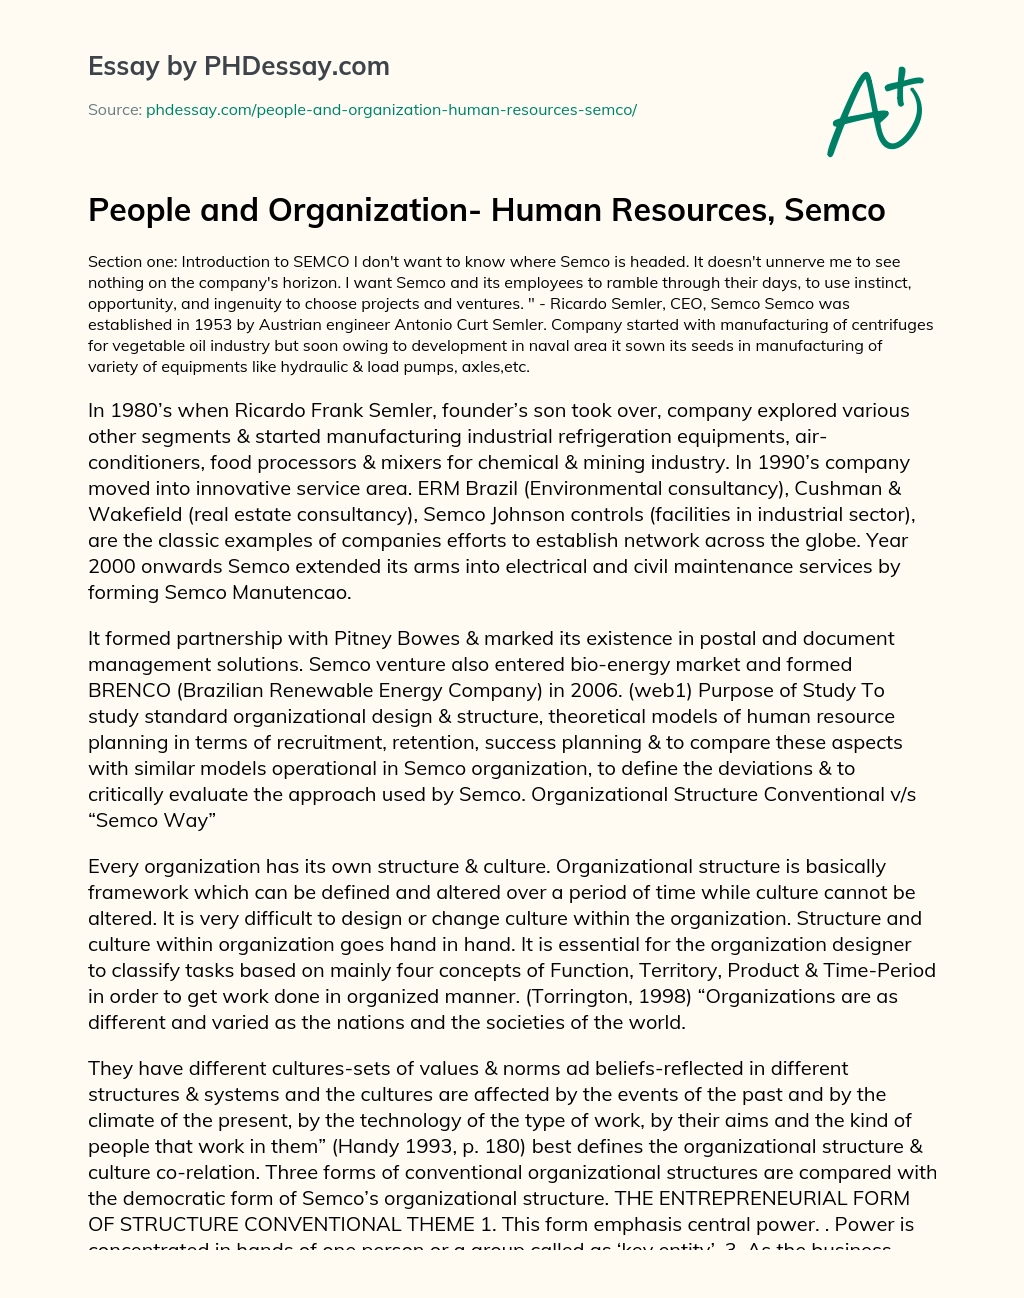 People and Organization- Human Resources, Semco essay